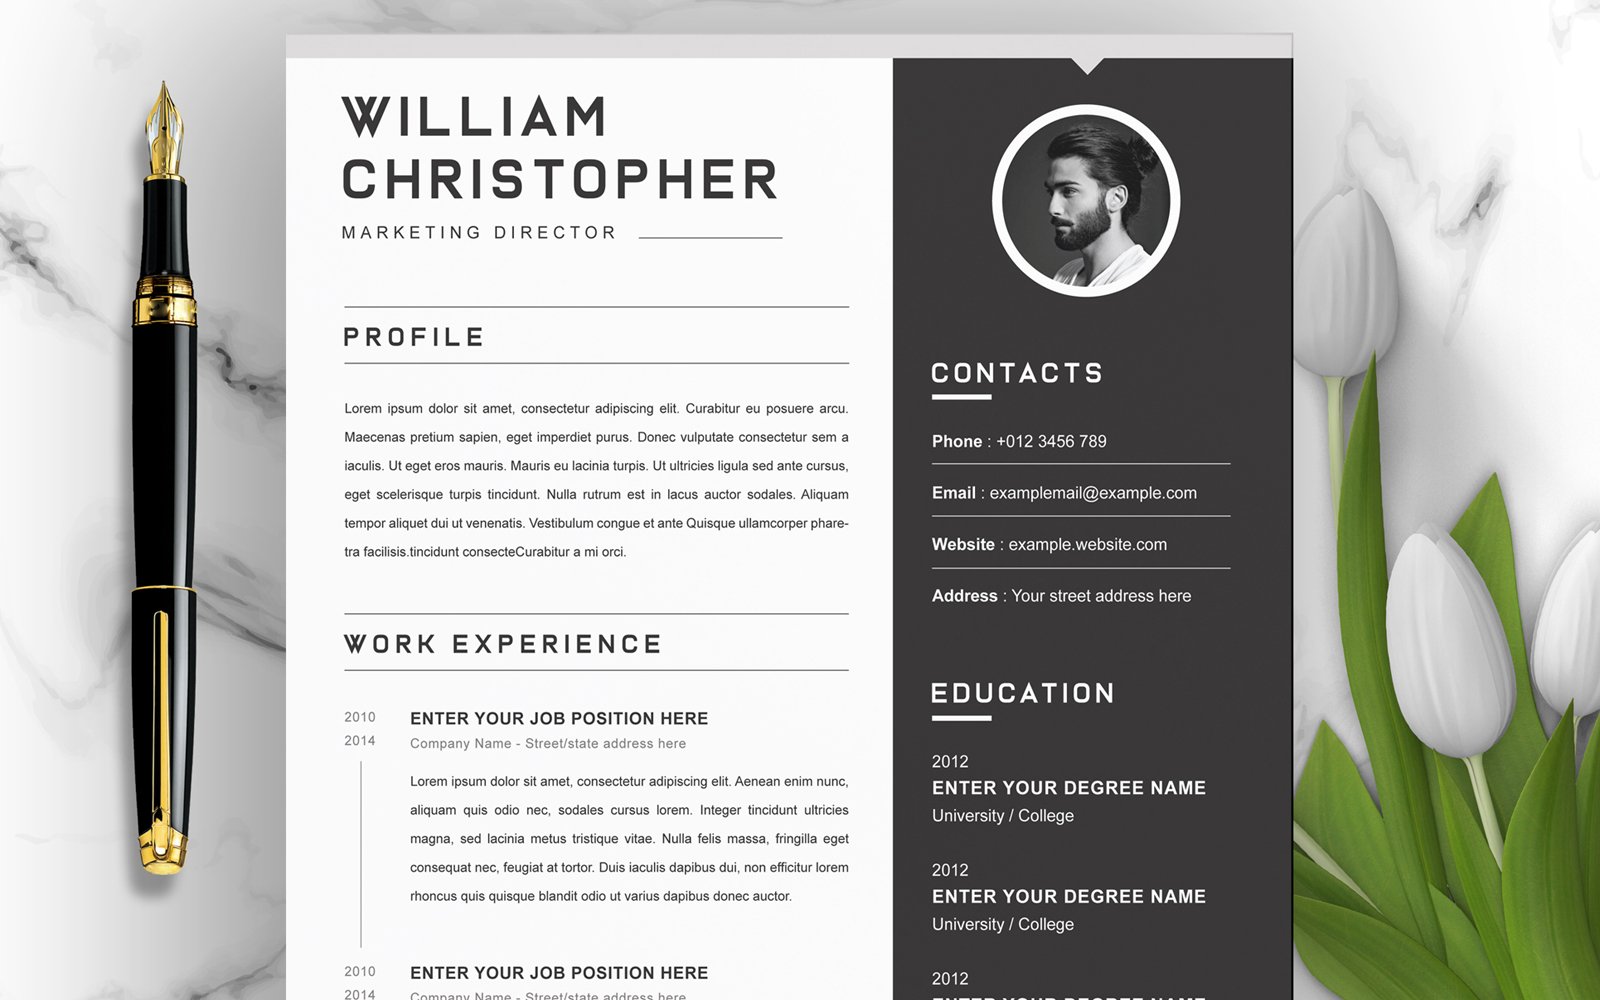 Template #221855 Resume Template Webdesign Template - Logo template Preview